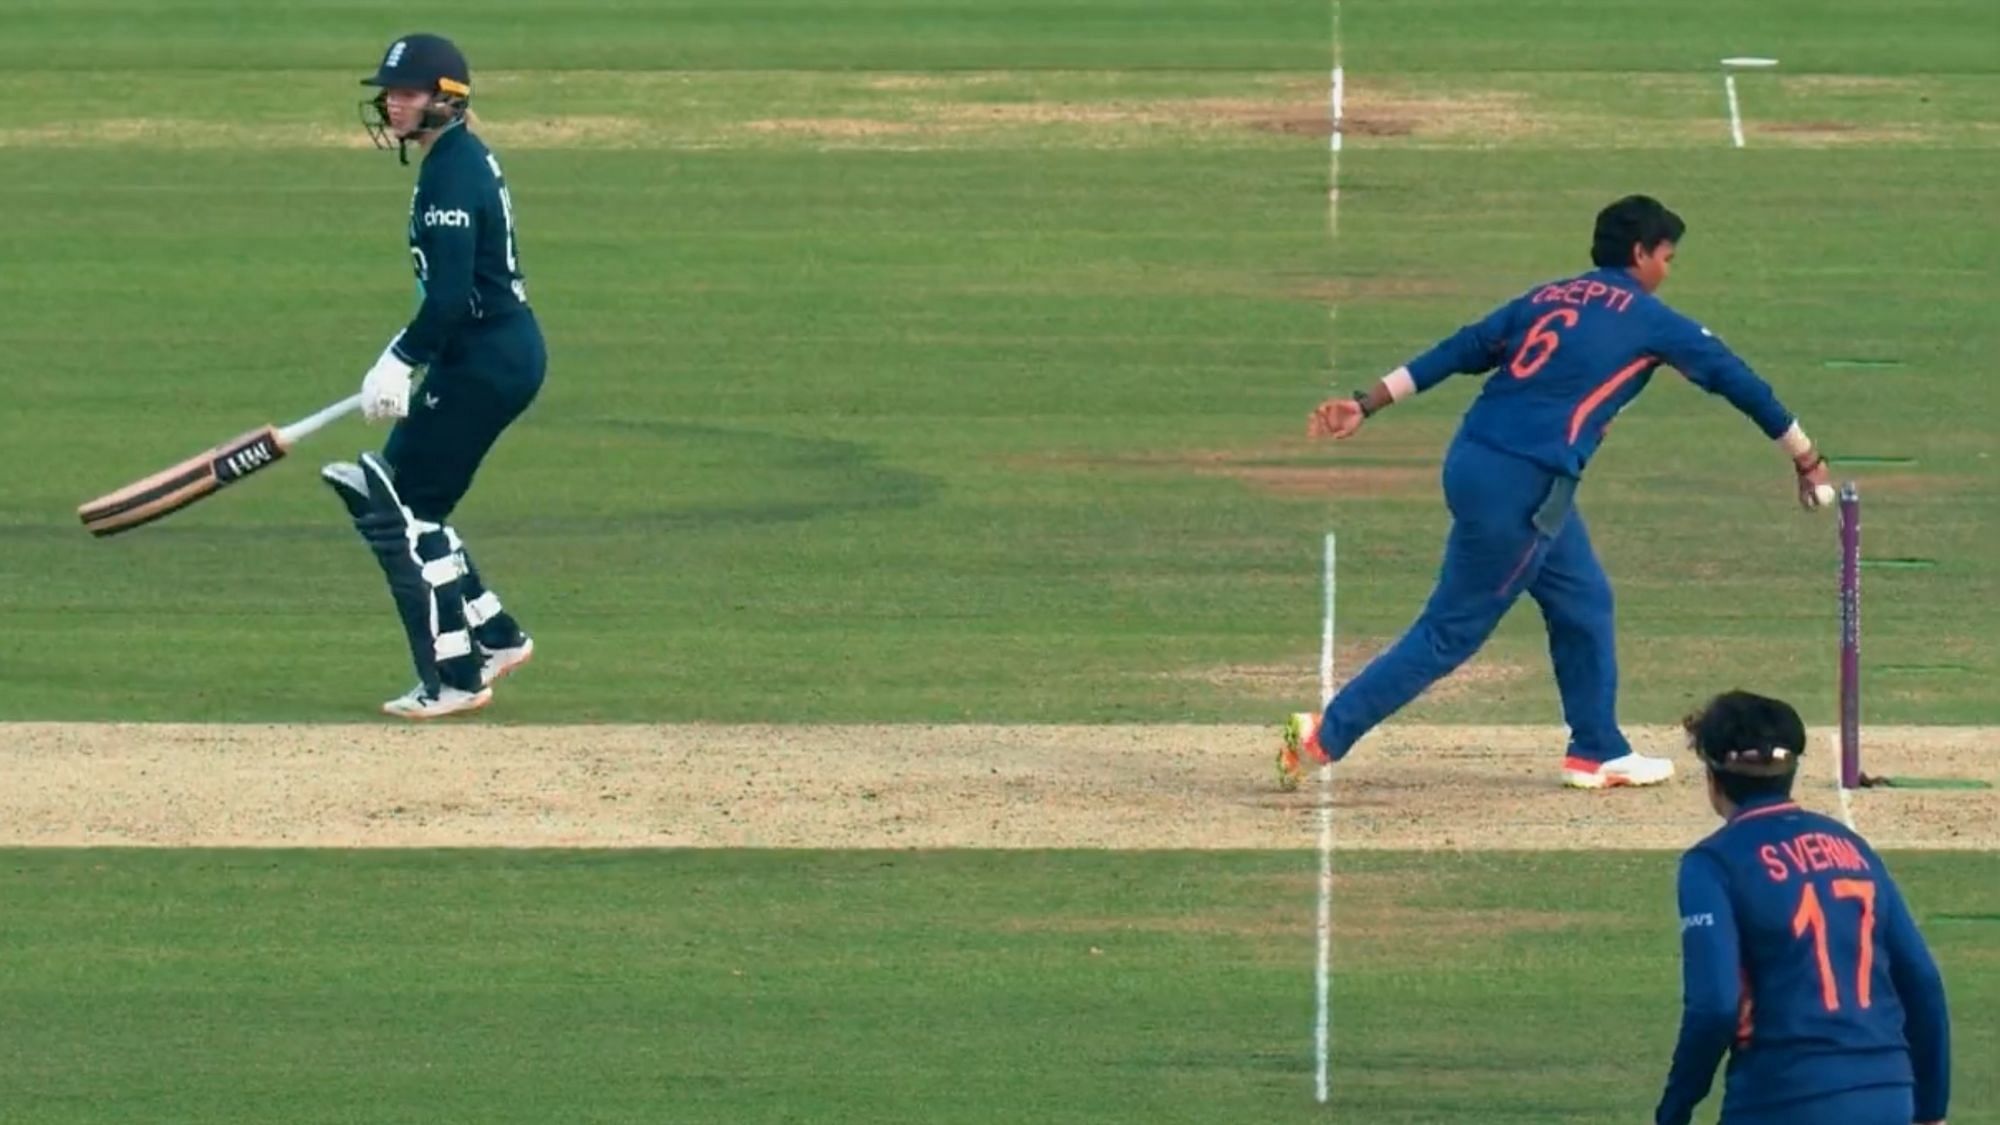 <div class="paragraphs"><p>MCC has clarified the rule regarding 'mankading' following the incident in India women's match against England women.</p></div>